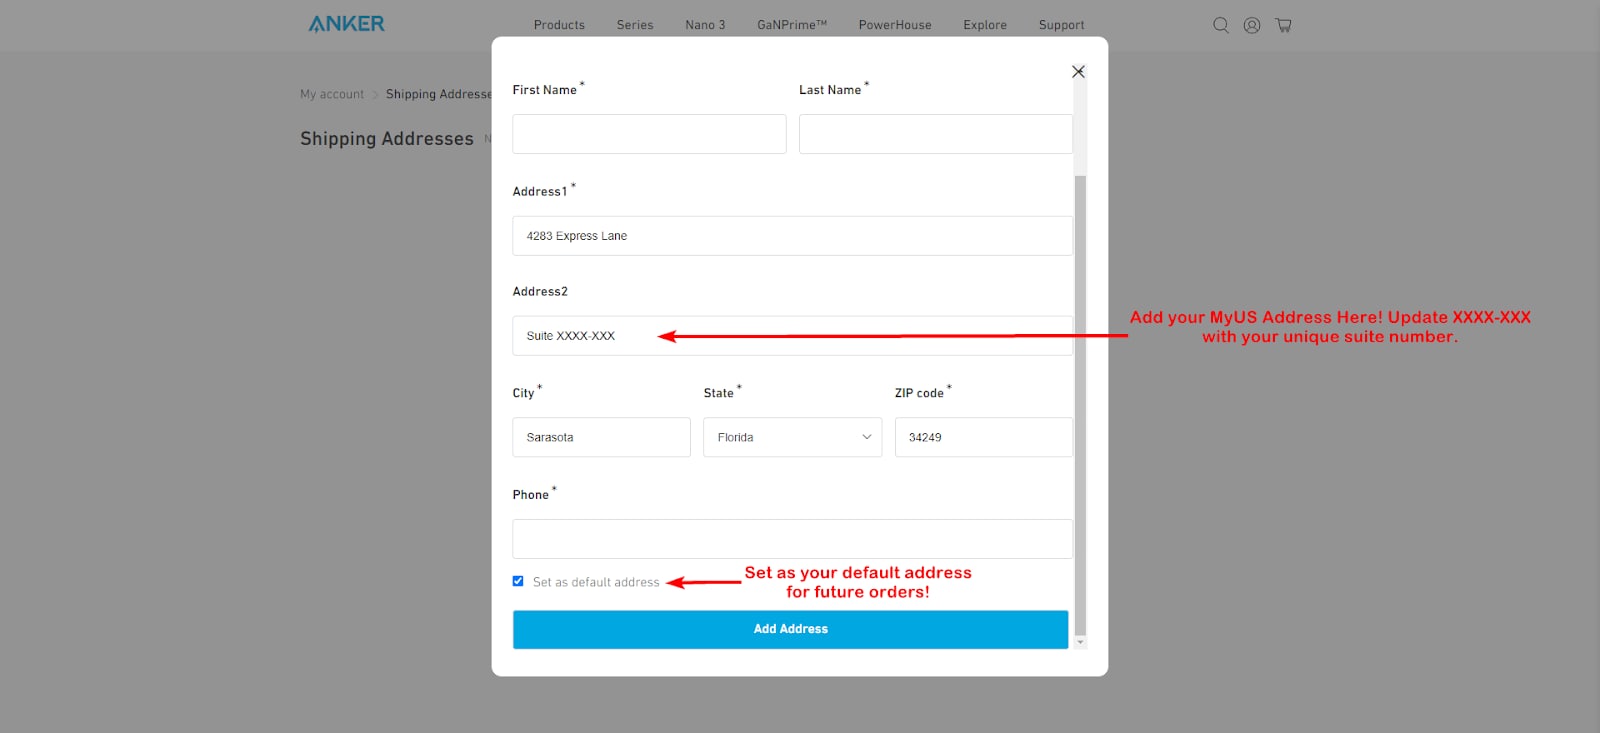 How to Add MyUS Address to AnkerDirect Account